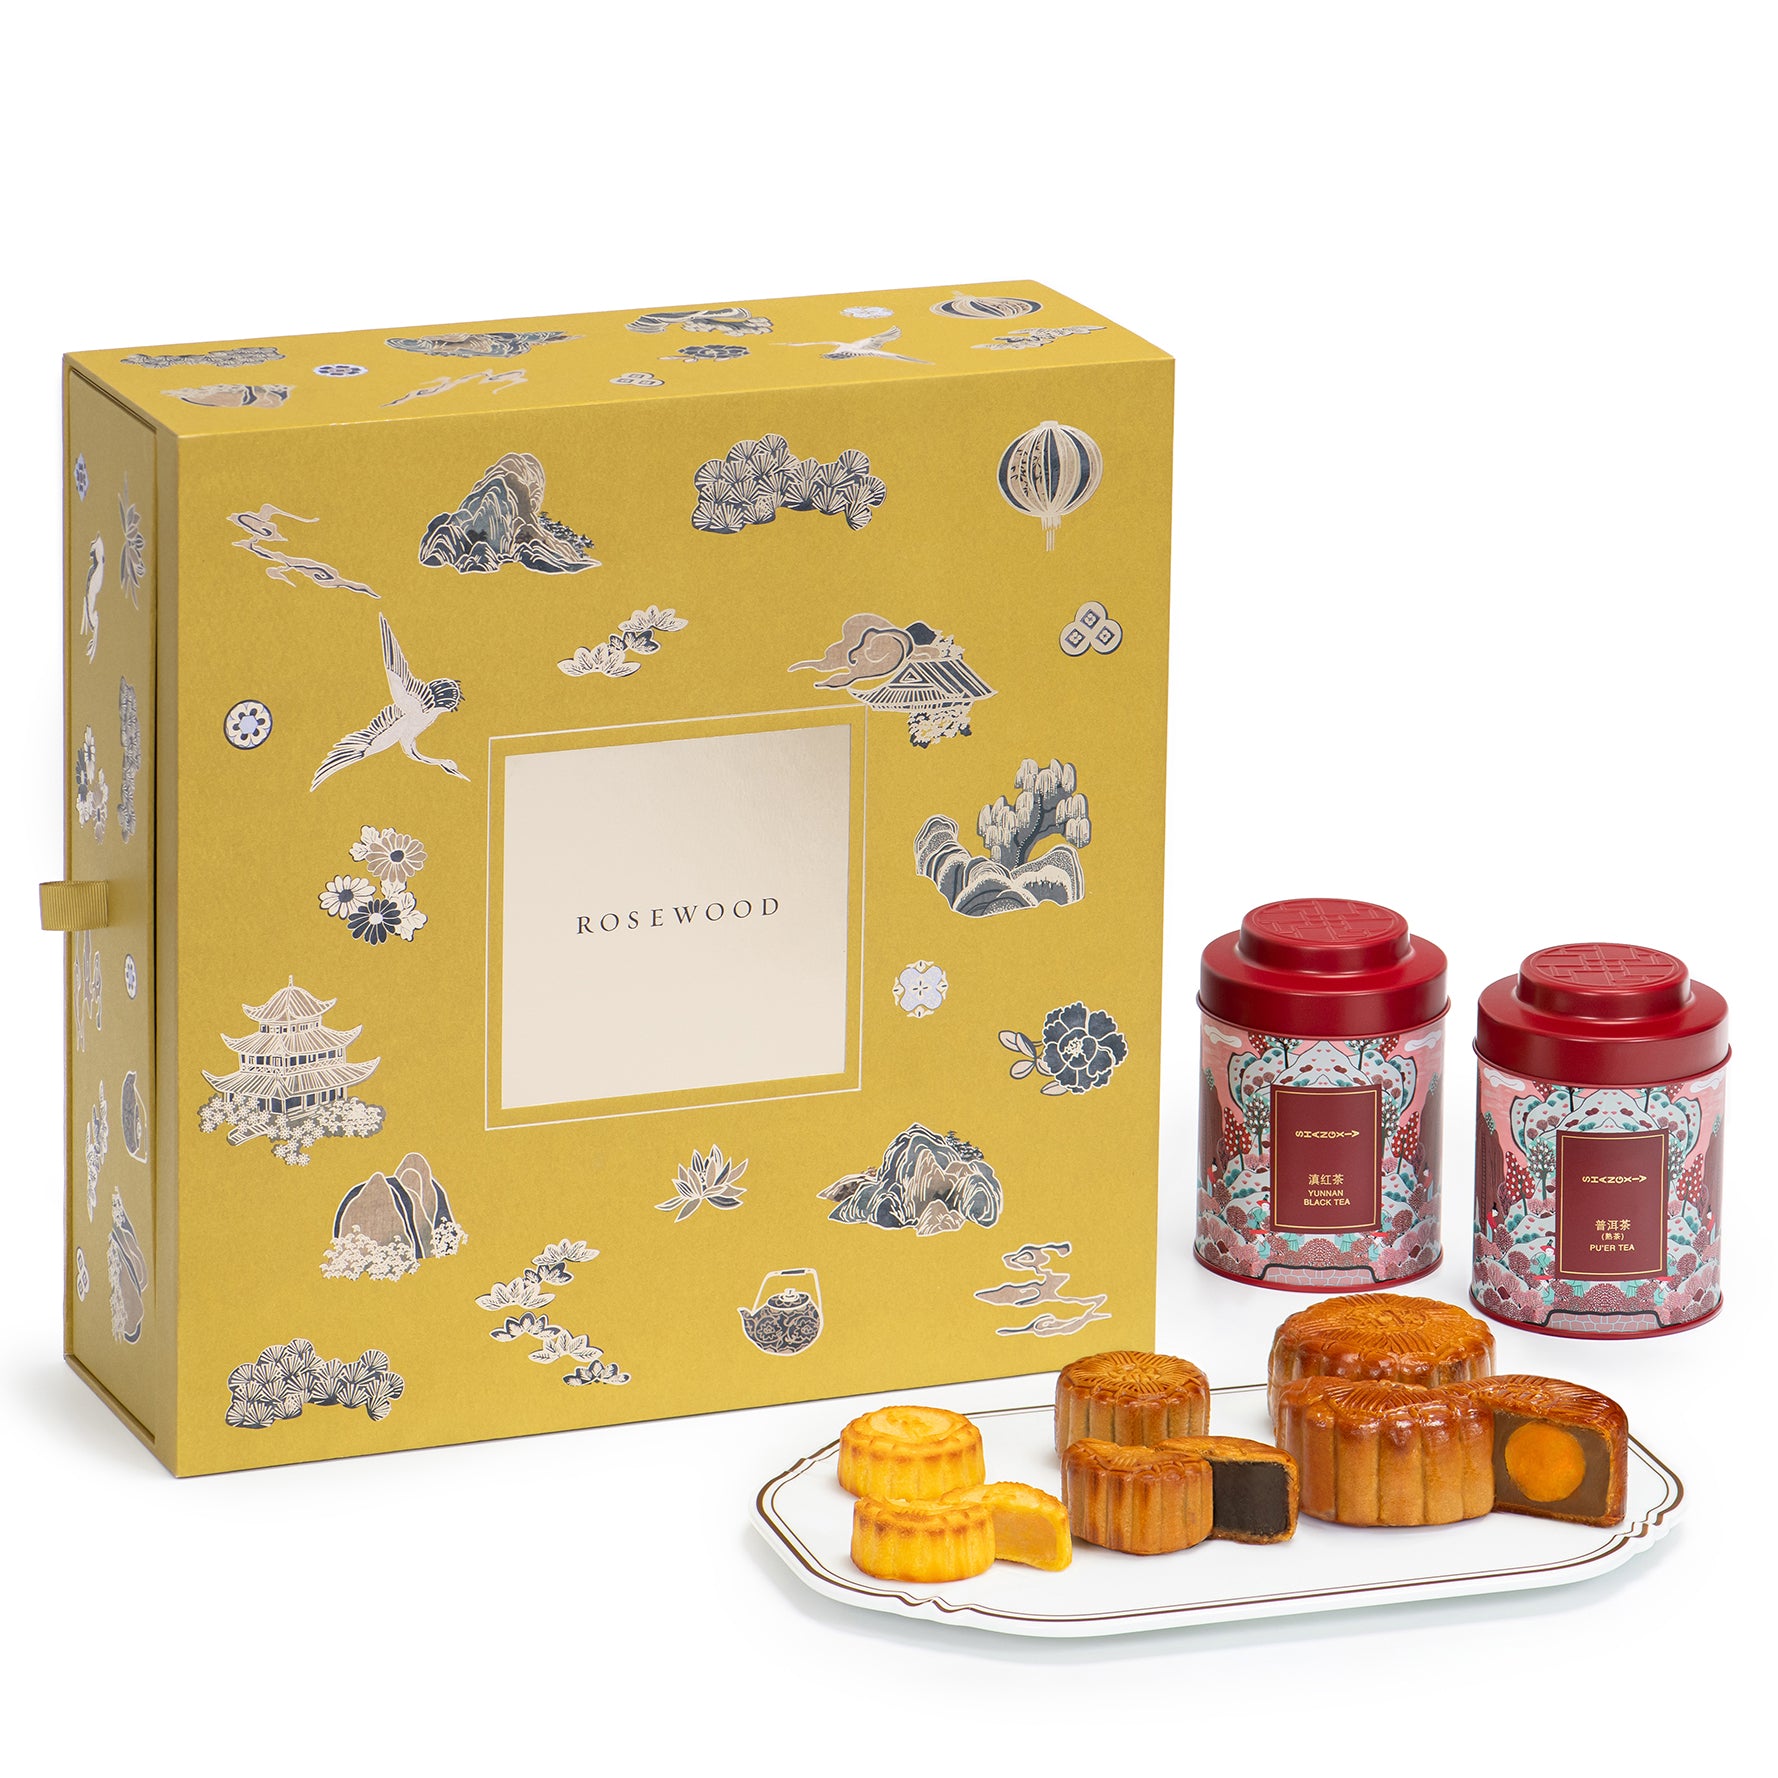 'The Rosewood Treasure' Mooncake Gift Box Limited Edition